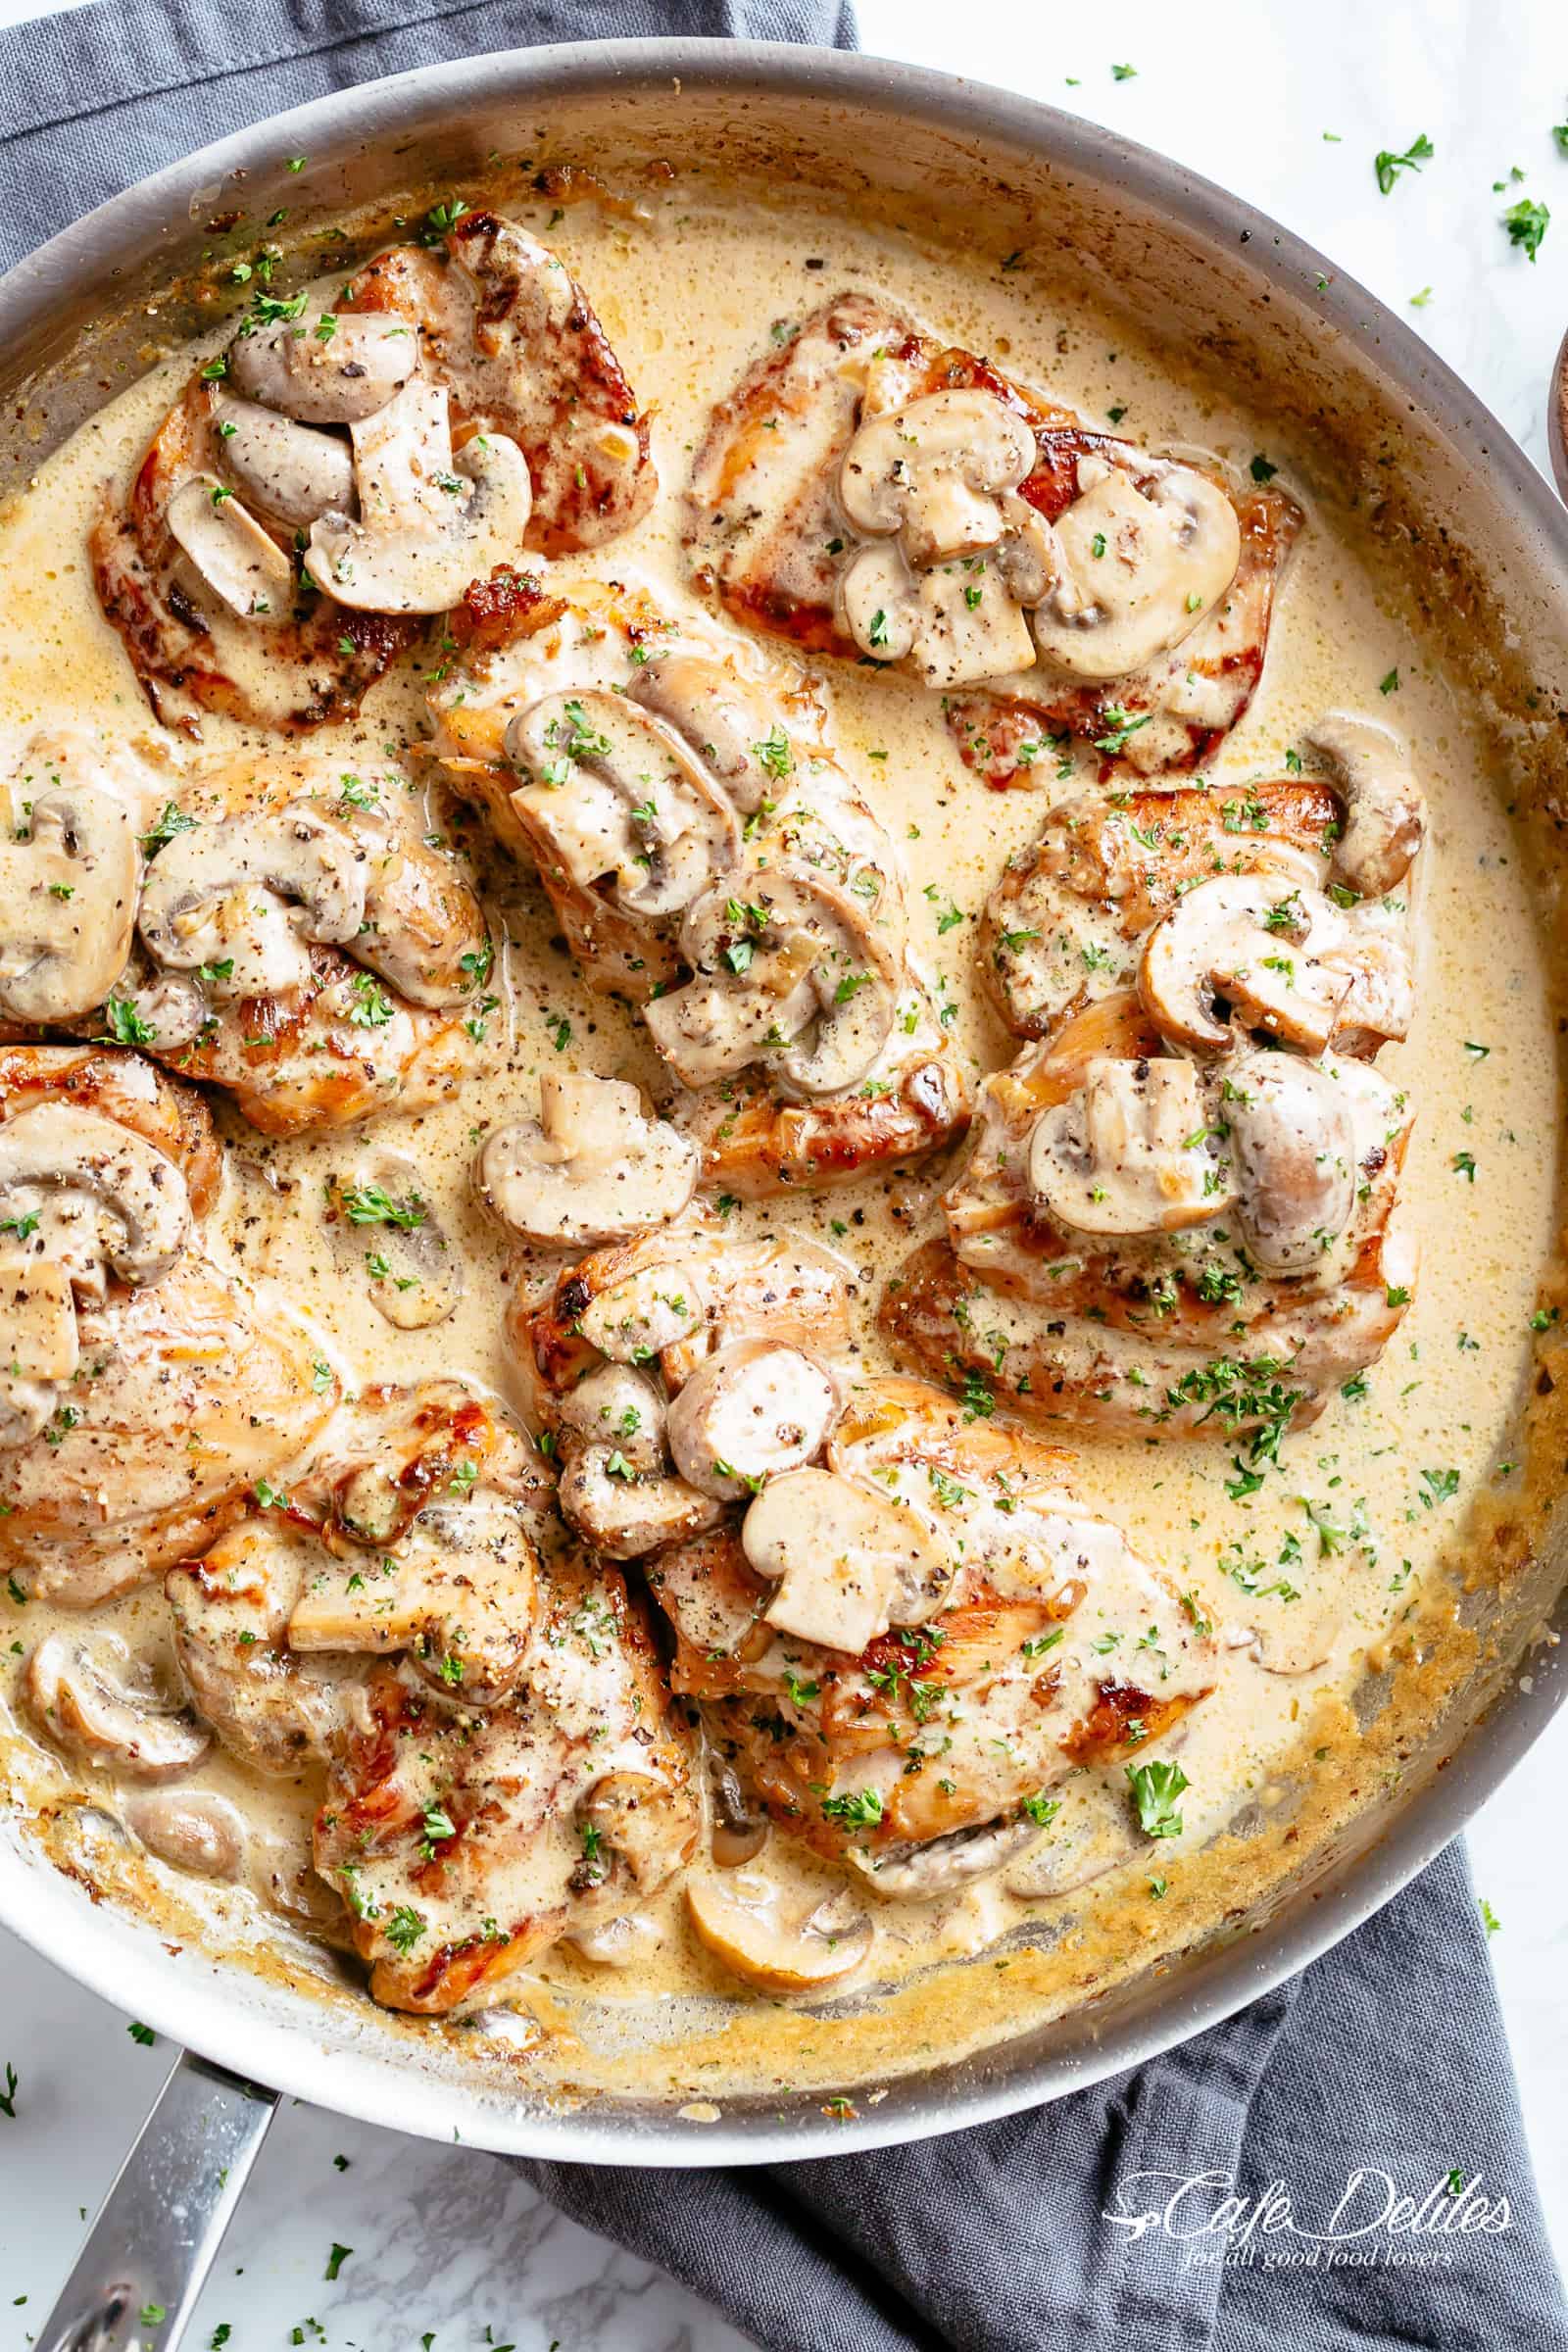 Crispy chicken thighs in a thick and creamy mushroom garlic sauce with a sprinkle of herbs and parmesan cheese is THE weeknight dinner everyone raves about! Serve over rice, pasta, mashed potatoes OR low carb Keto options like mashed cauliflower or zucchini noodles! | cafedelites.com